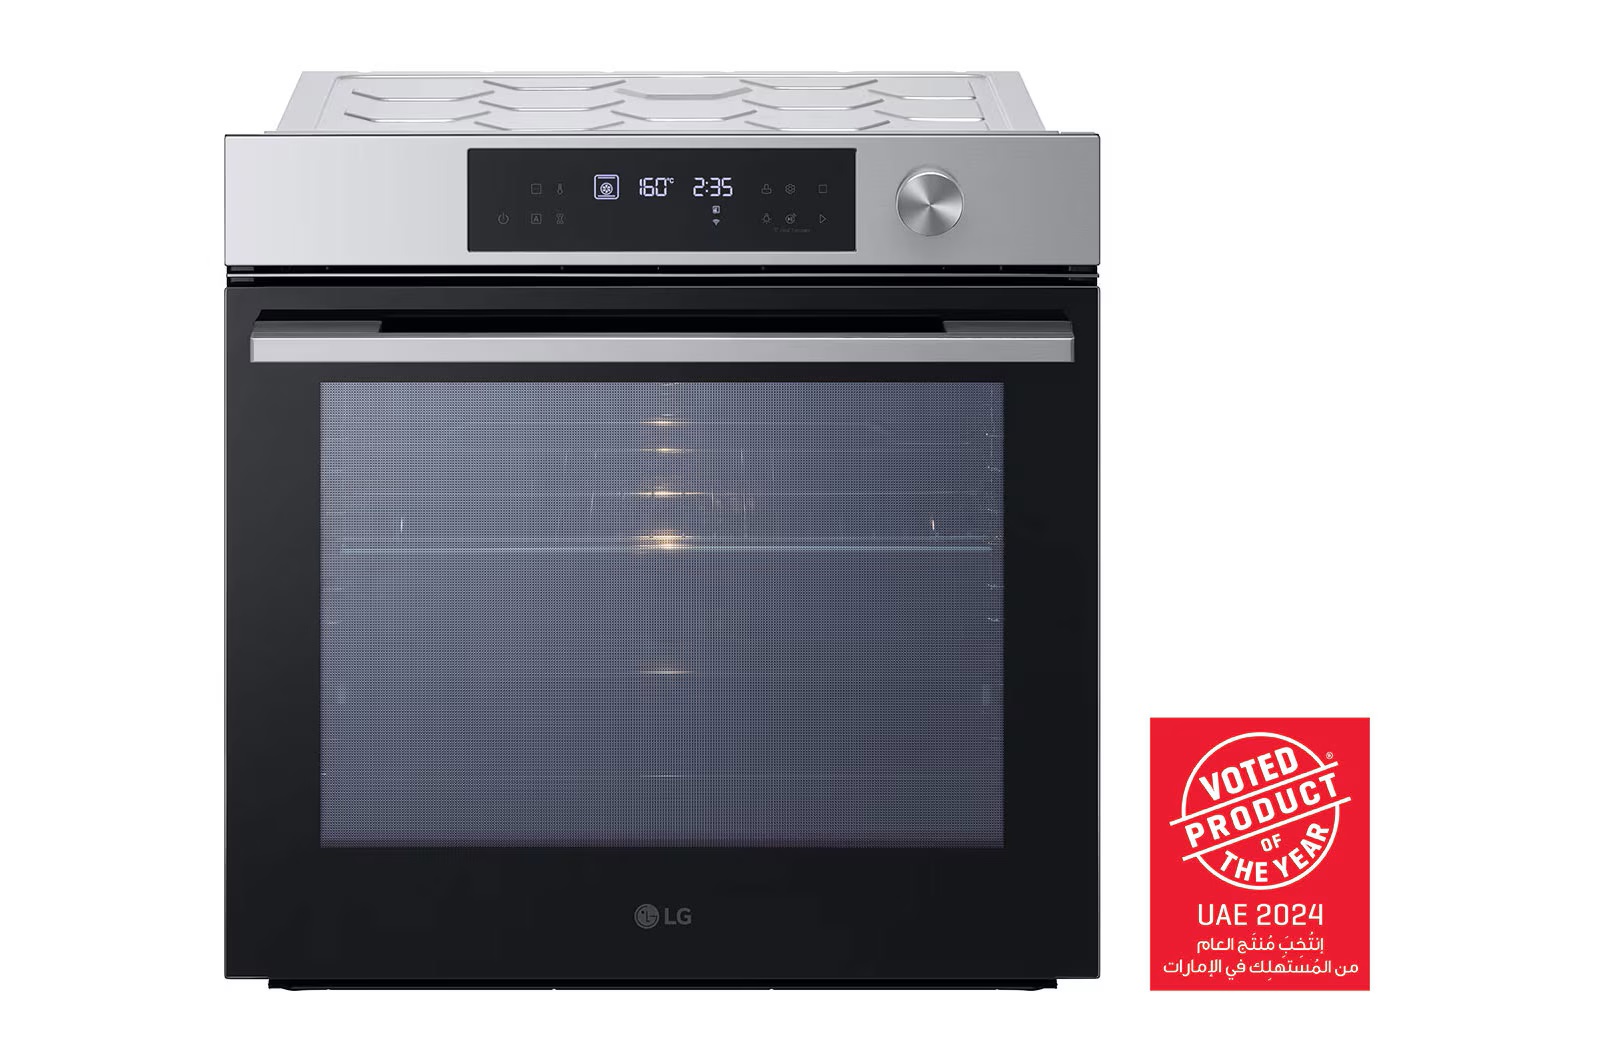 Elevate Your Chef Game and Transform Your Kitchen with LG's Award-Winning Next-Gen Instaview Oven